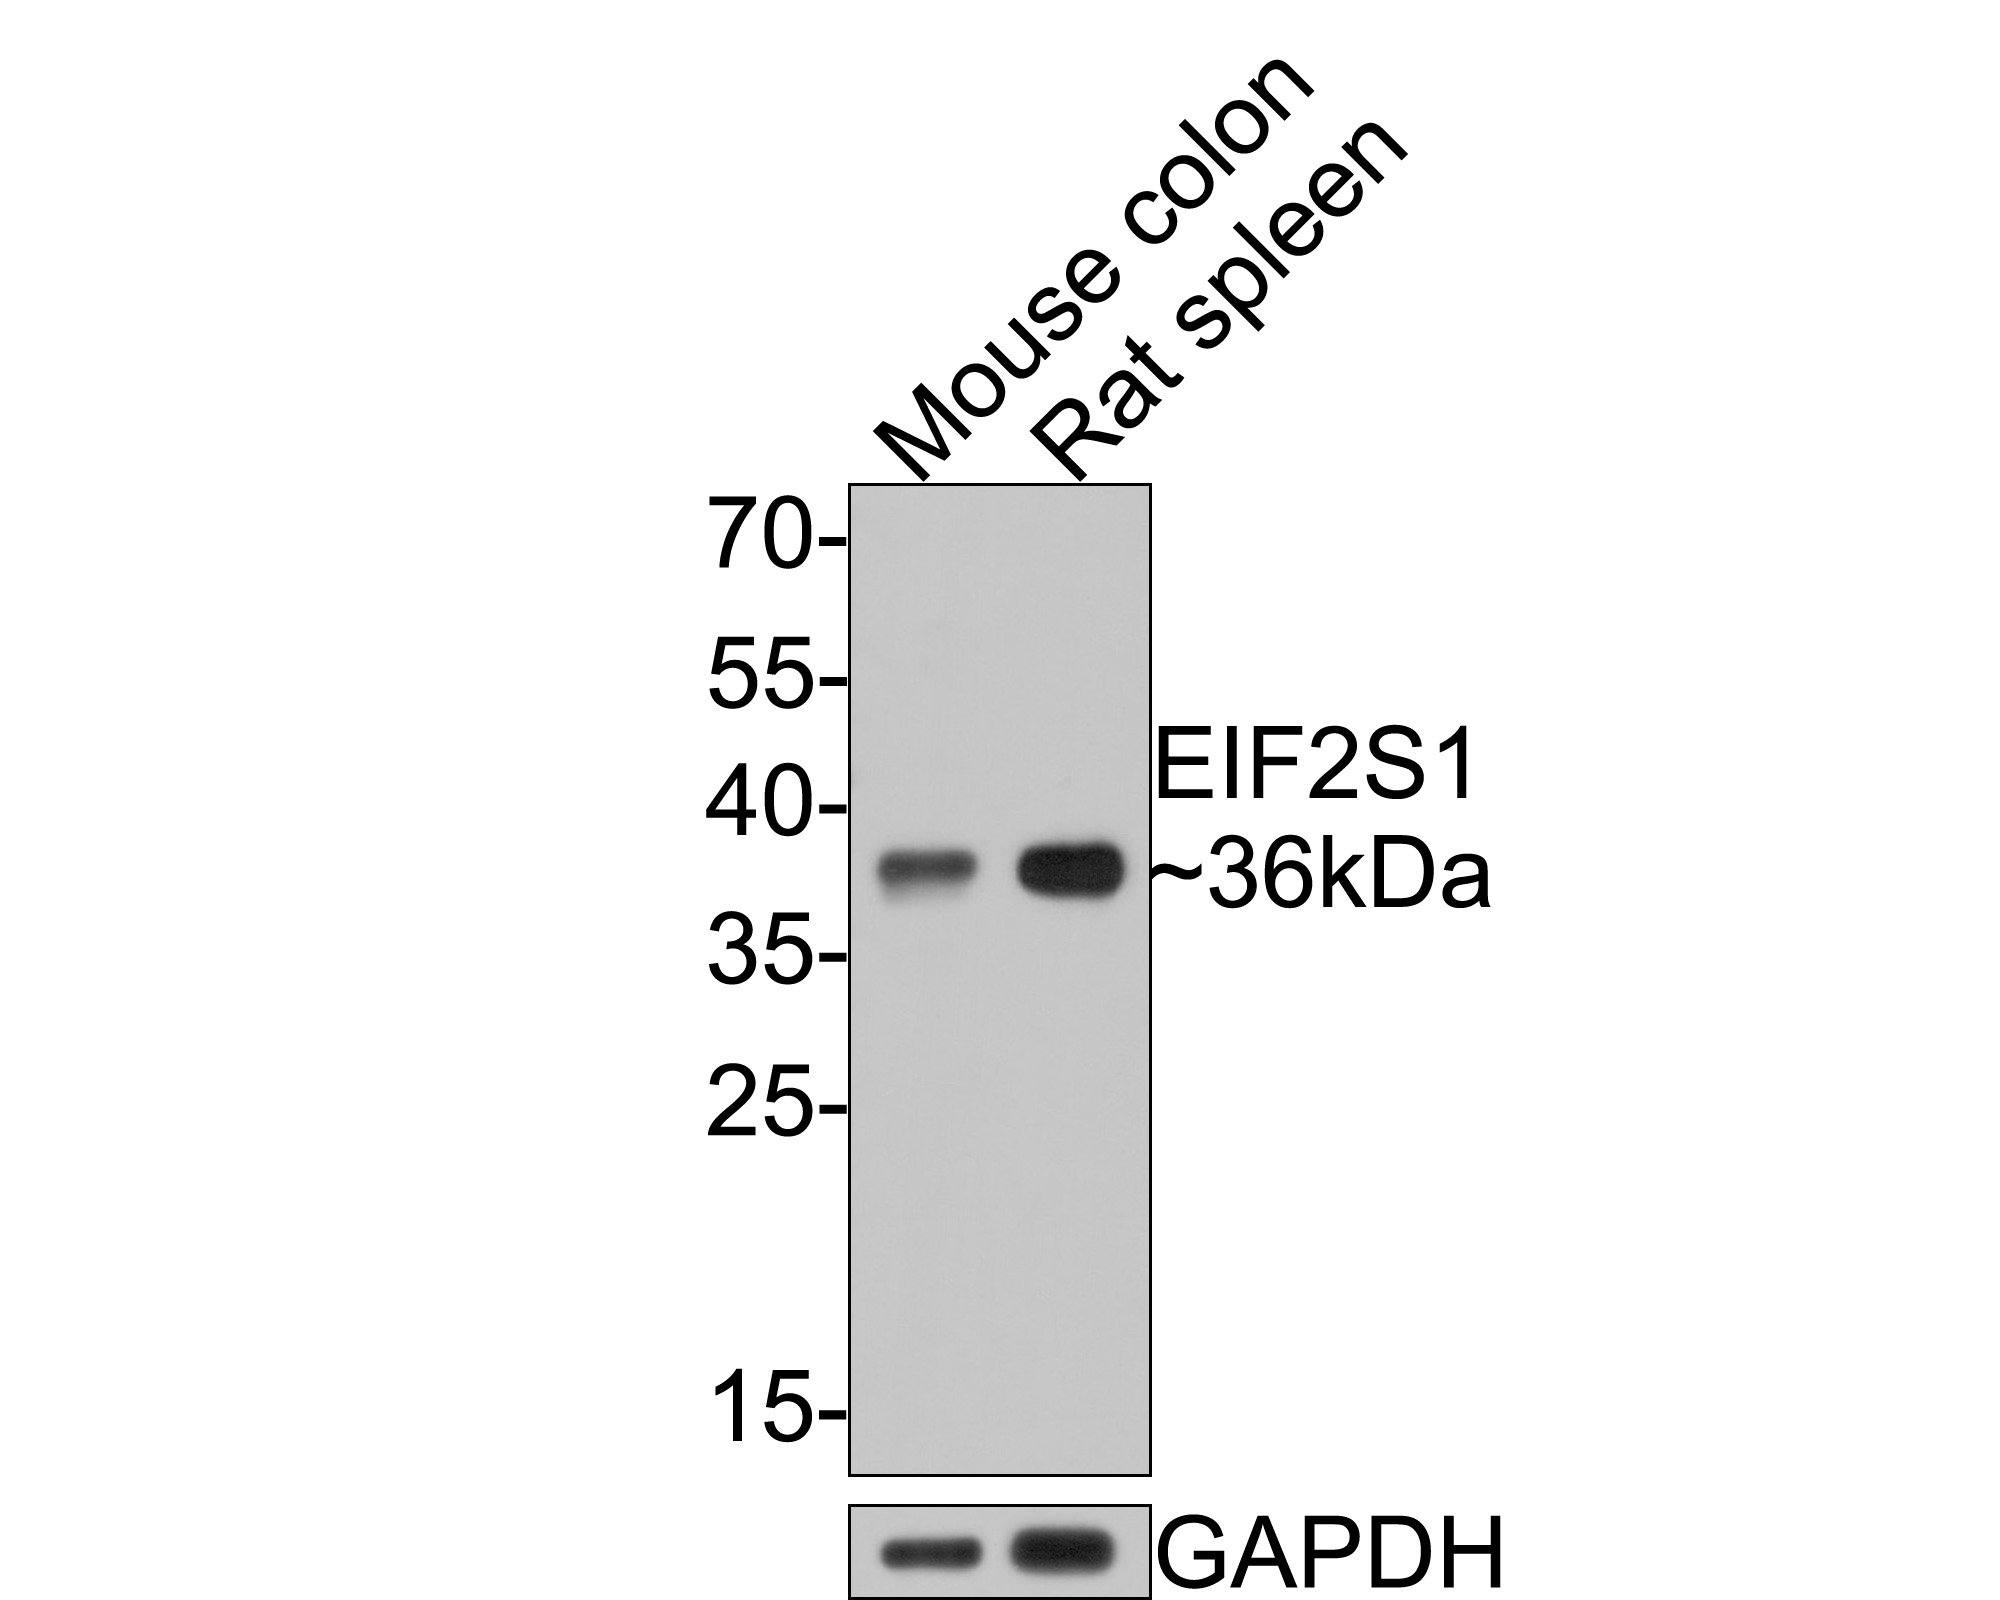 Western blot analysis of EIF2S1 on different lysates with Rabbit anti-EIF2S1 antibody (HA500385) at 1/500 dilution.<br />
<br />
Lane 1: Mouse colon tissue lysate<br />
Lane 2: Rat spleen tissue lysate<br />
<br />
Lysates/proteins at 20 µg/Lane.<br />
<br />
Predicted band size: 36 kDa<br />
Observed band size: 36 kDa<br />
<br />
Exposure time: 30 seconds;<br />
<br />
12% SDS-PAGE gel.<br />
<br />
Proteins were transferred to a PVDF membrane and blocked with 5% NFDM/TBST for 1 hour at room temperature. The primary antibody (HA500385) at 1/500 dilution was used in 5% NFDM/TBST at room temperature for 2 hours. Goat Anti-Rabbit IgG - HRP Secondary Antibody (HA1001) at 1:300,000 dilution was used for 1 hour at room temperature.